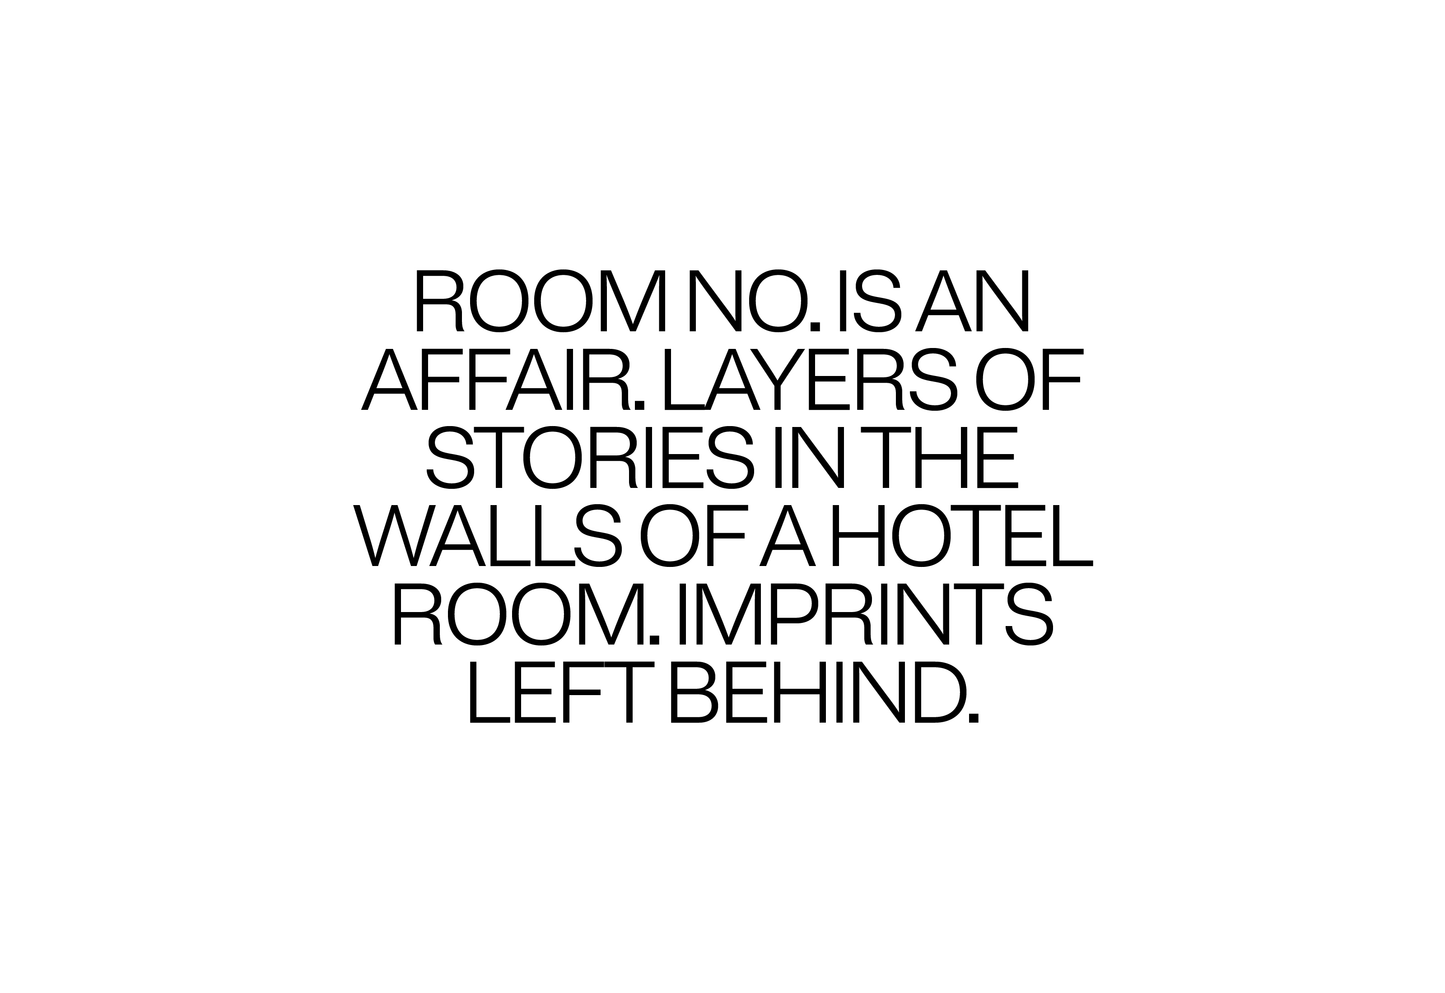 Room No. is an affair. Layers of stories in the walls of a hotel room. Imprints left behind. 